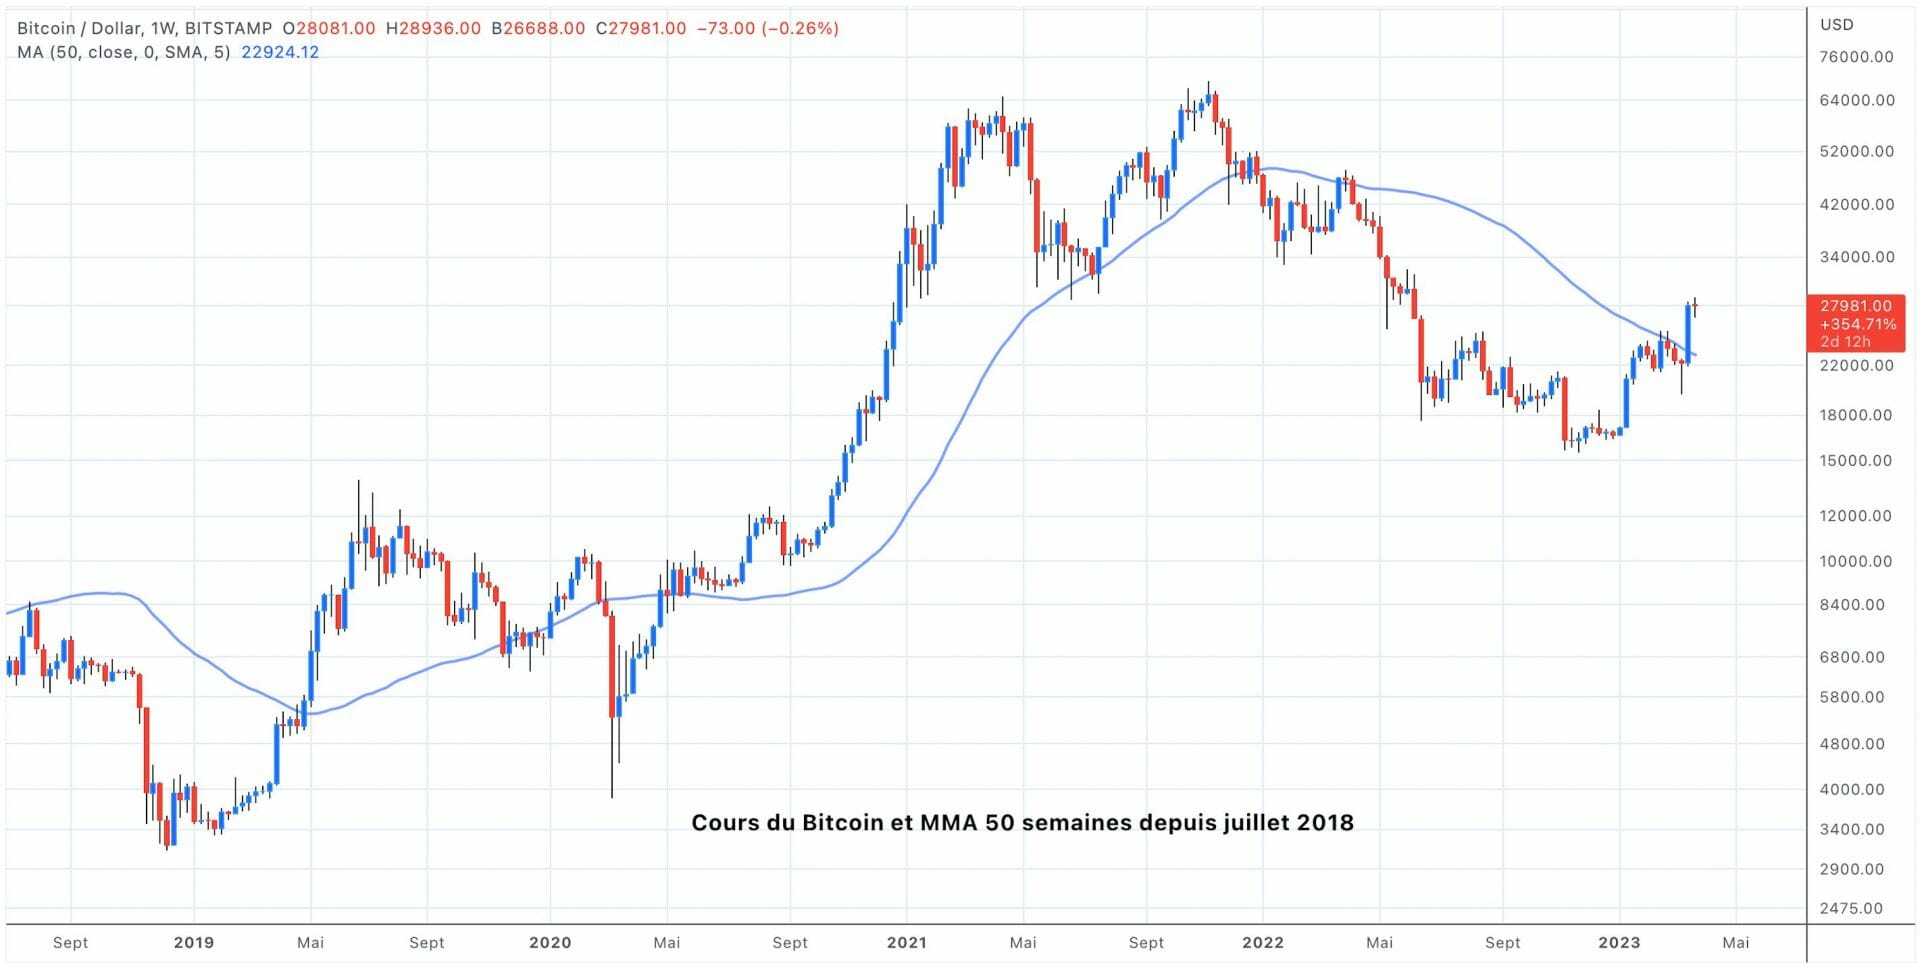 Analyse cours du Bitcoin versus Moyenne mobile à 50 semaines - 24 mars 2023